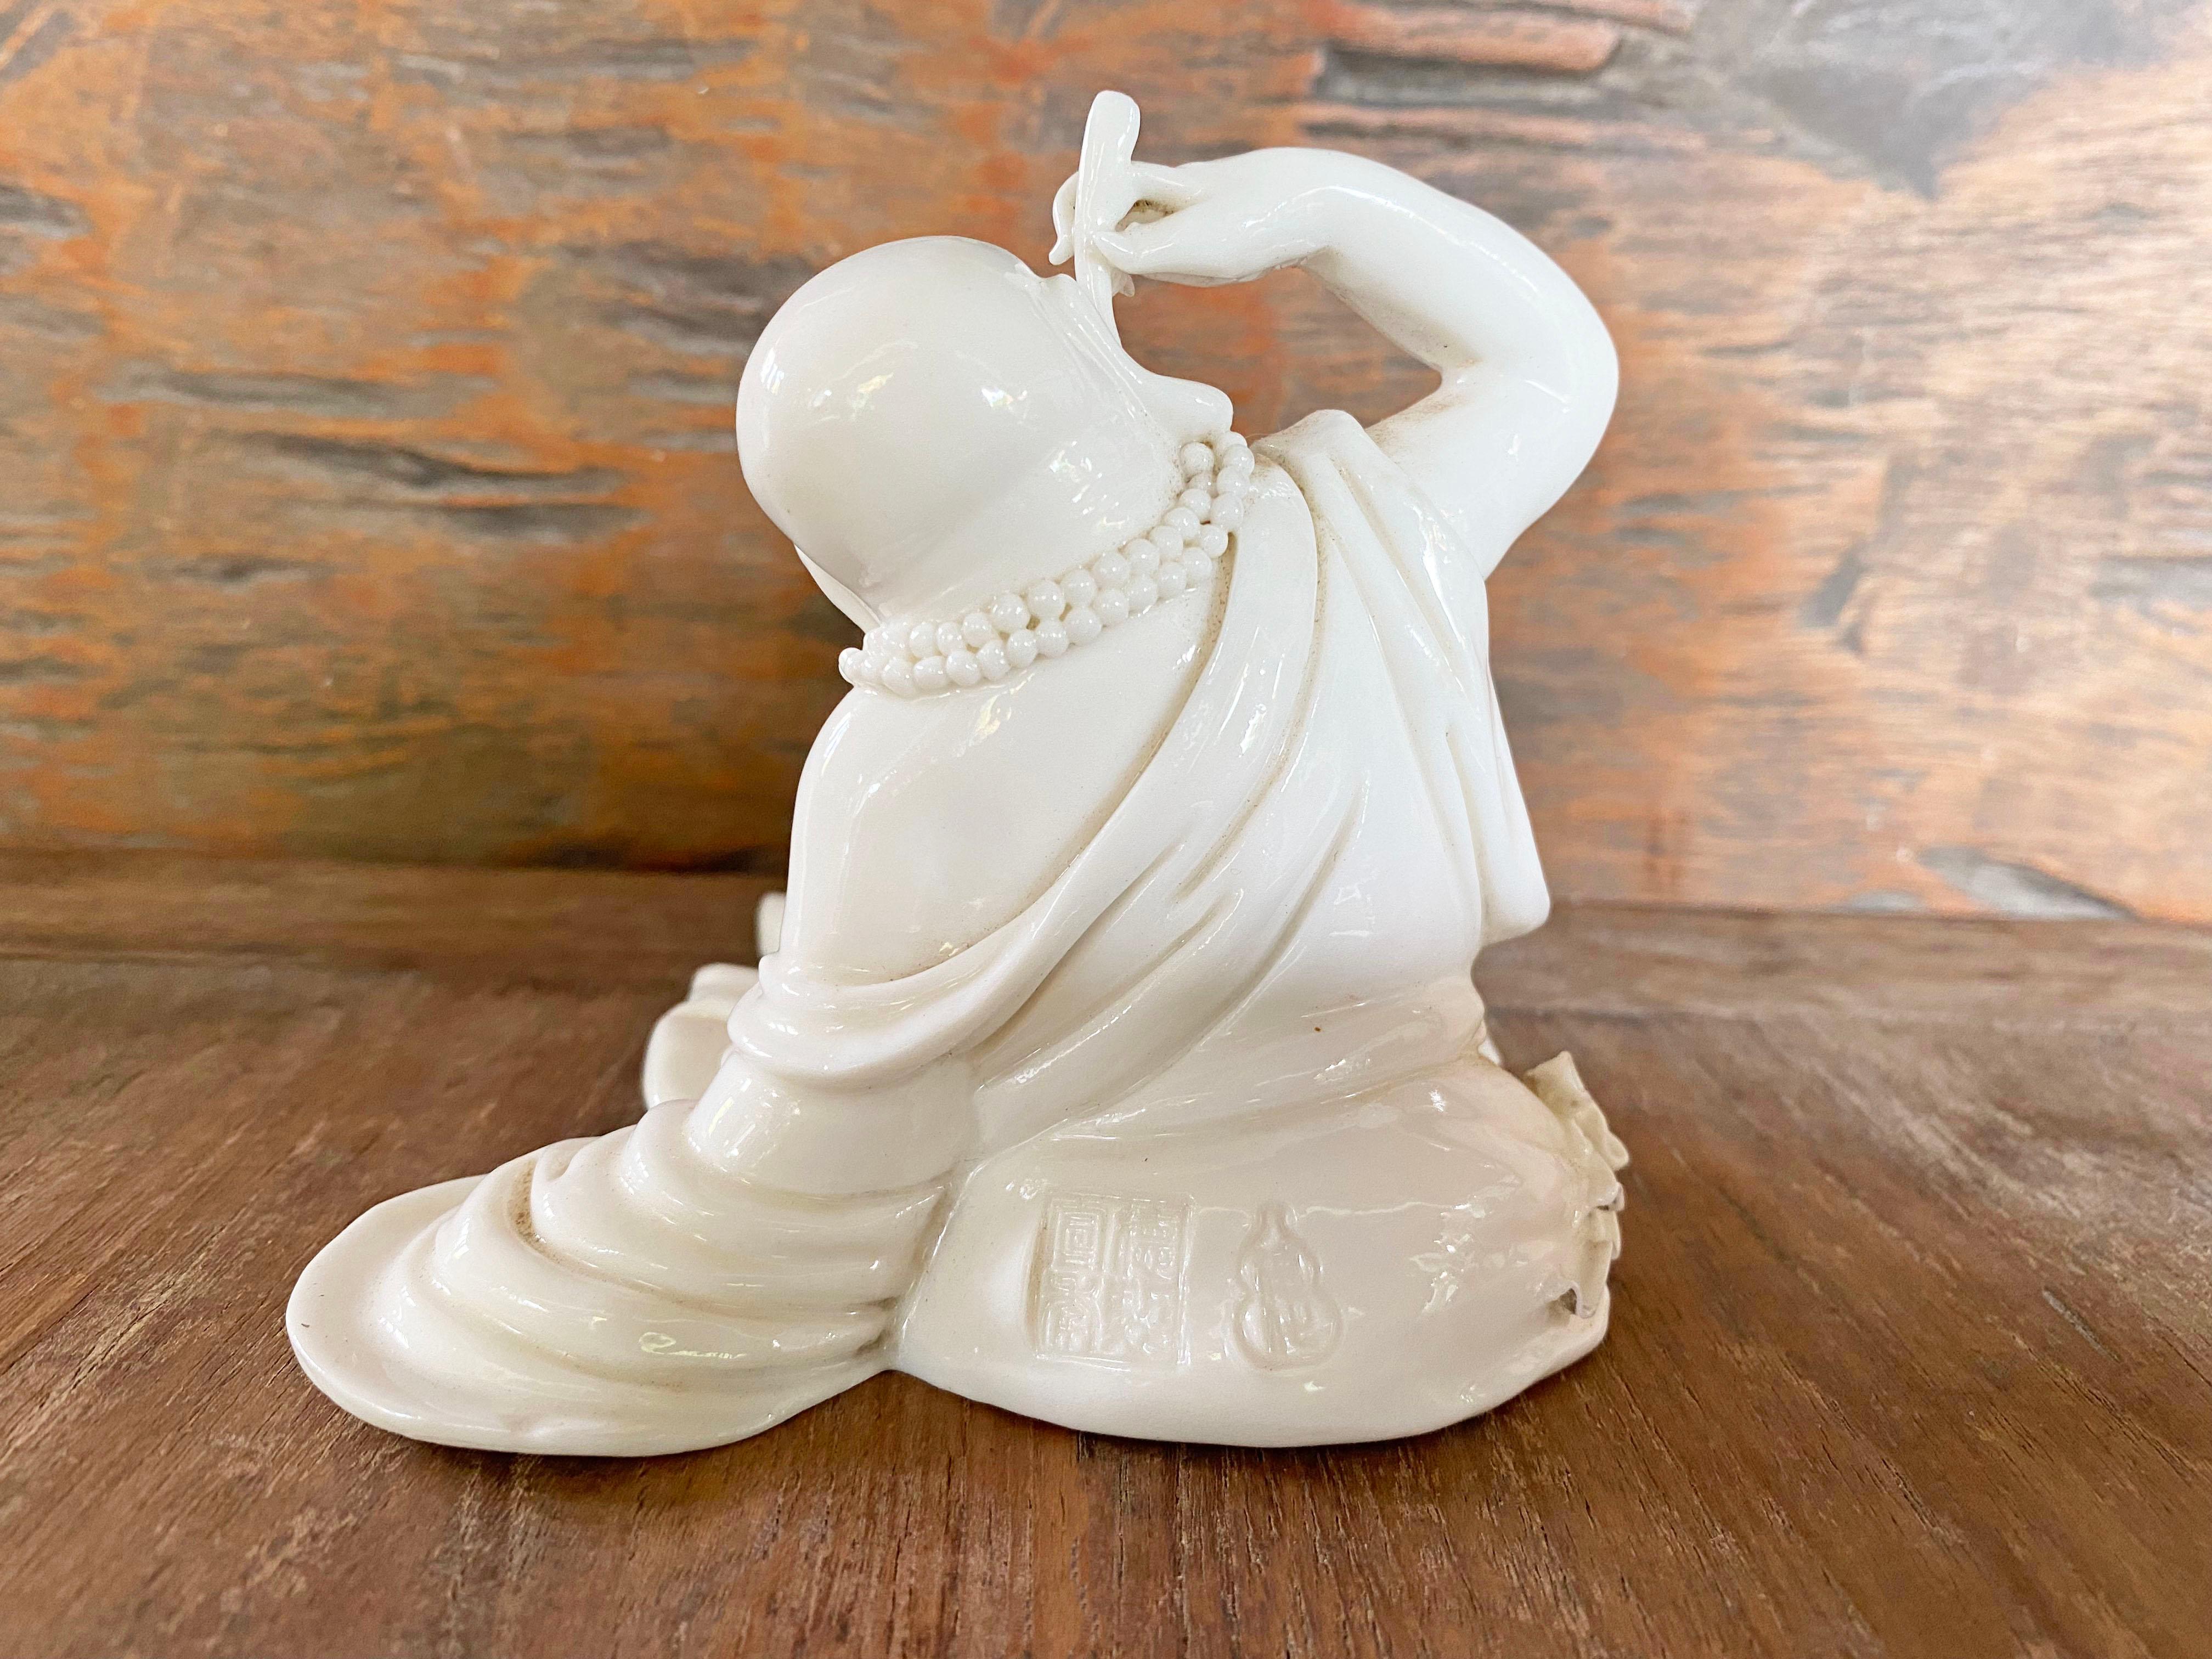 This Chinese Porcelain Dehua depicts a seated Budai (Chinese Monk) wearing a loose robe. It orginates from the Kilns o Dehua in China's Fujian Province. Dehua porcelain is regarded for it thick, lustrous and clear white glaze. Dehua is sometimes